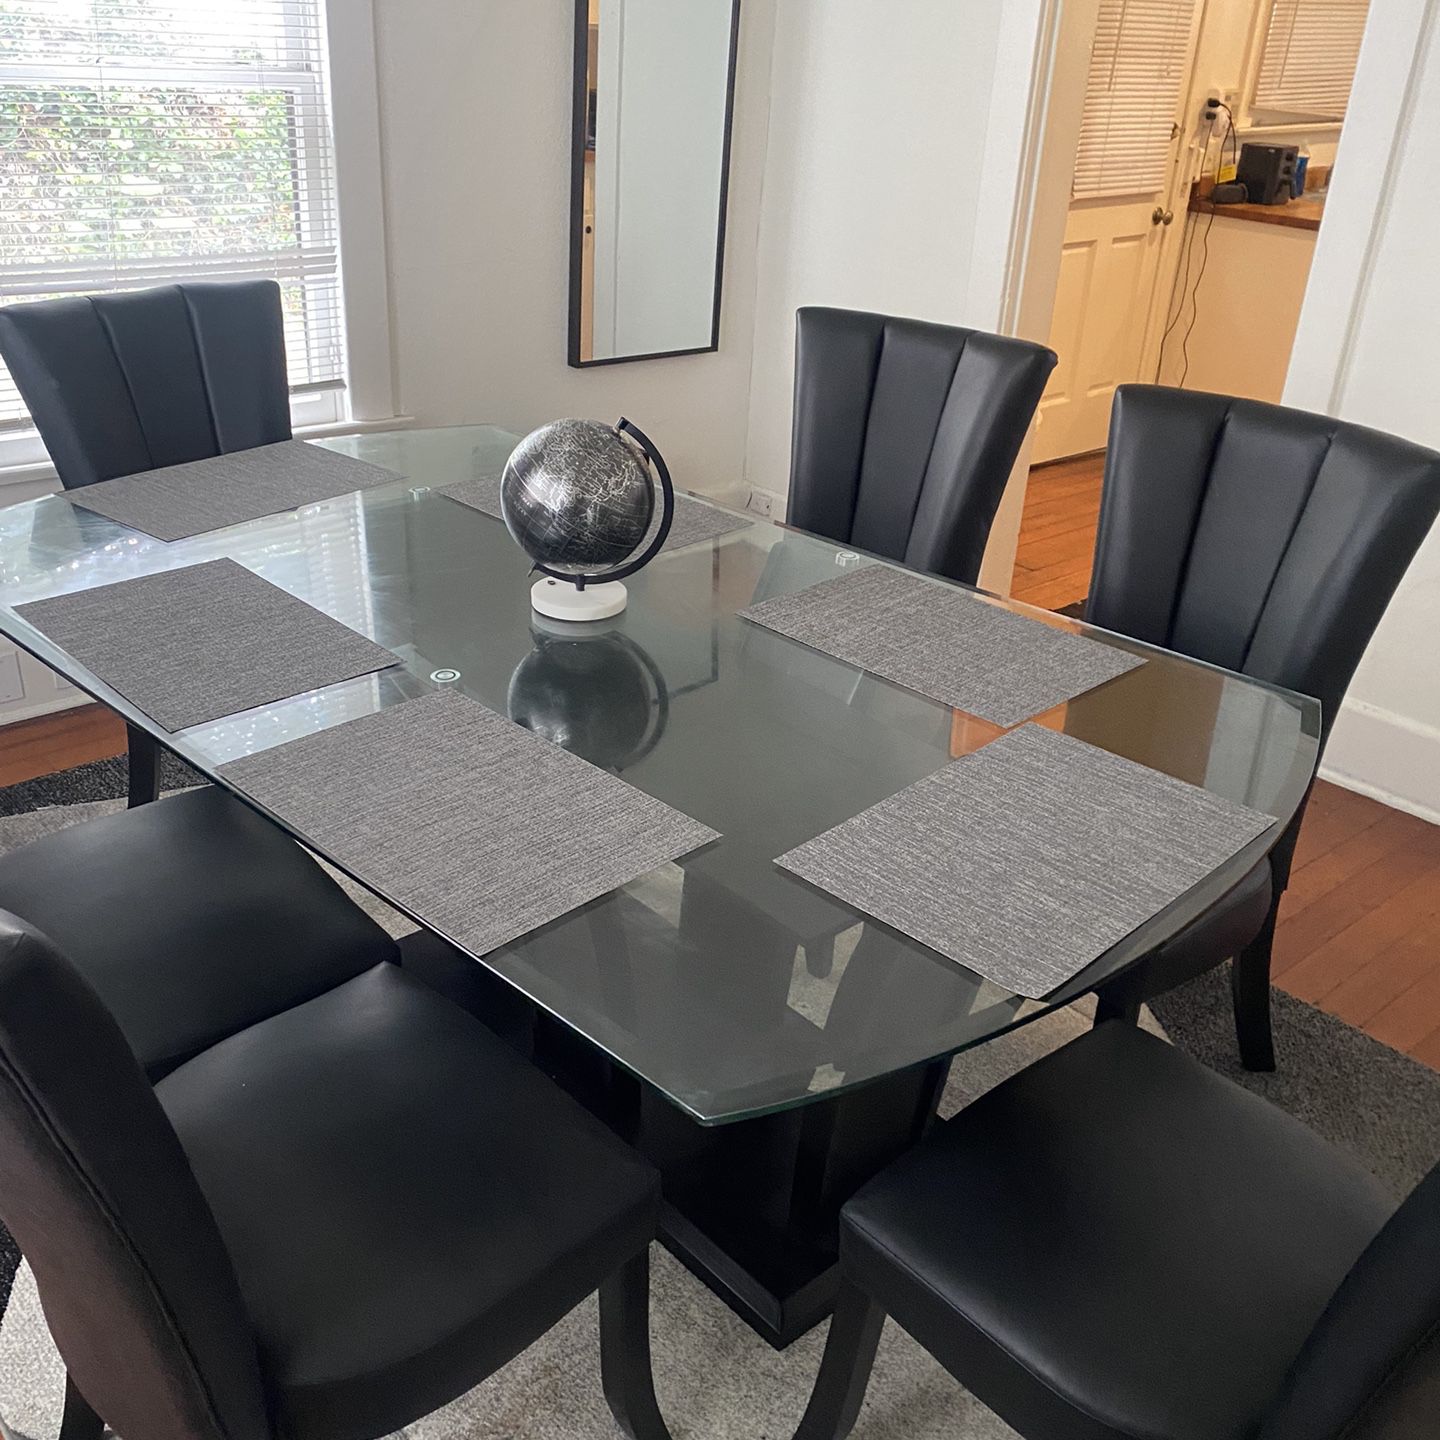 6 piece glass dinning table set, chairs and table squares included